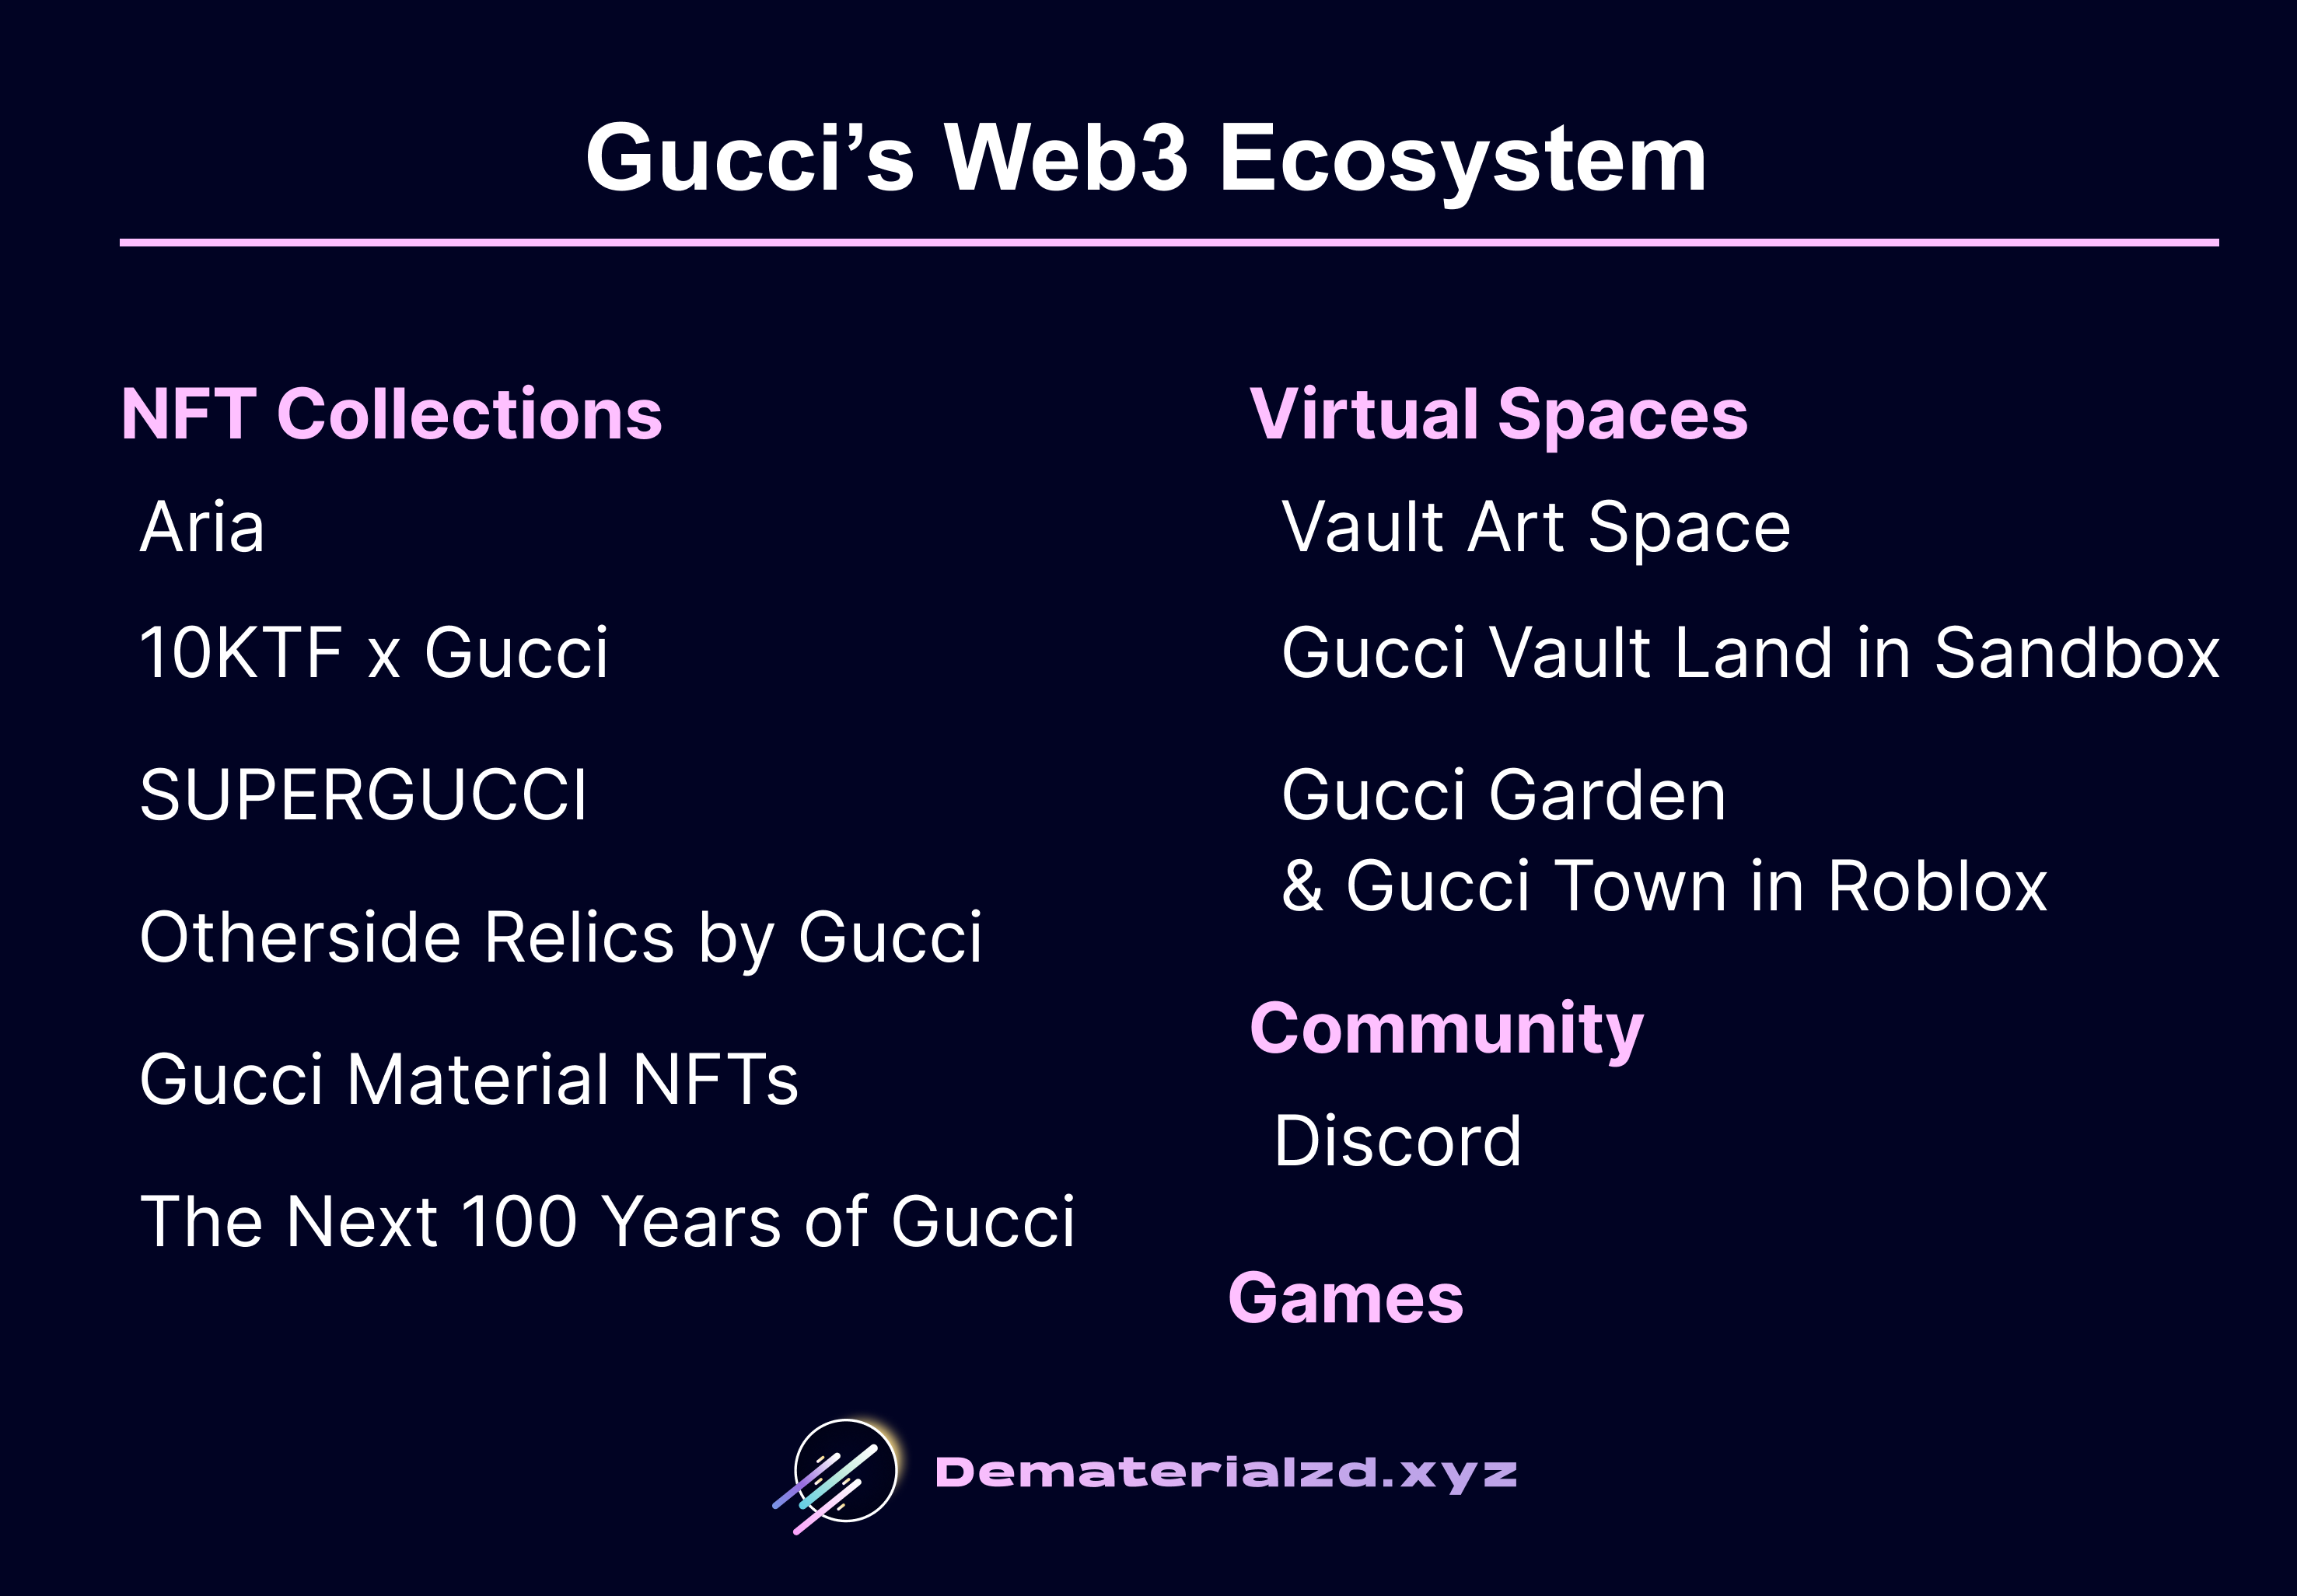 Shaping a strong brand narrative with Web3 - Gucci